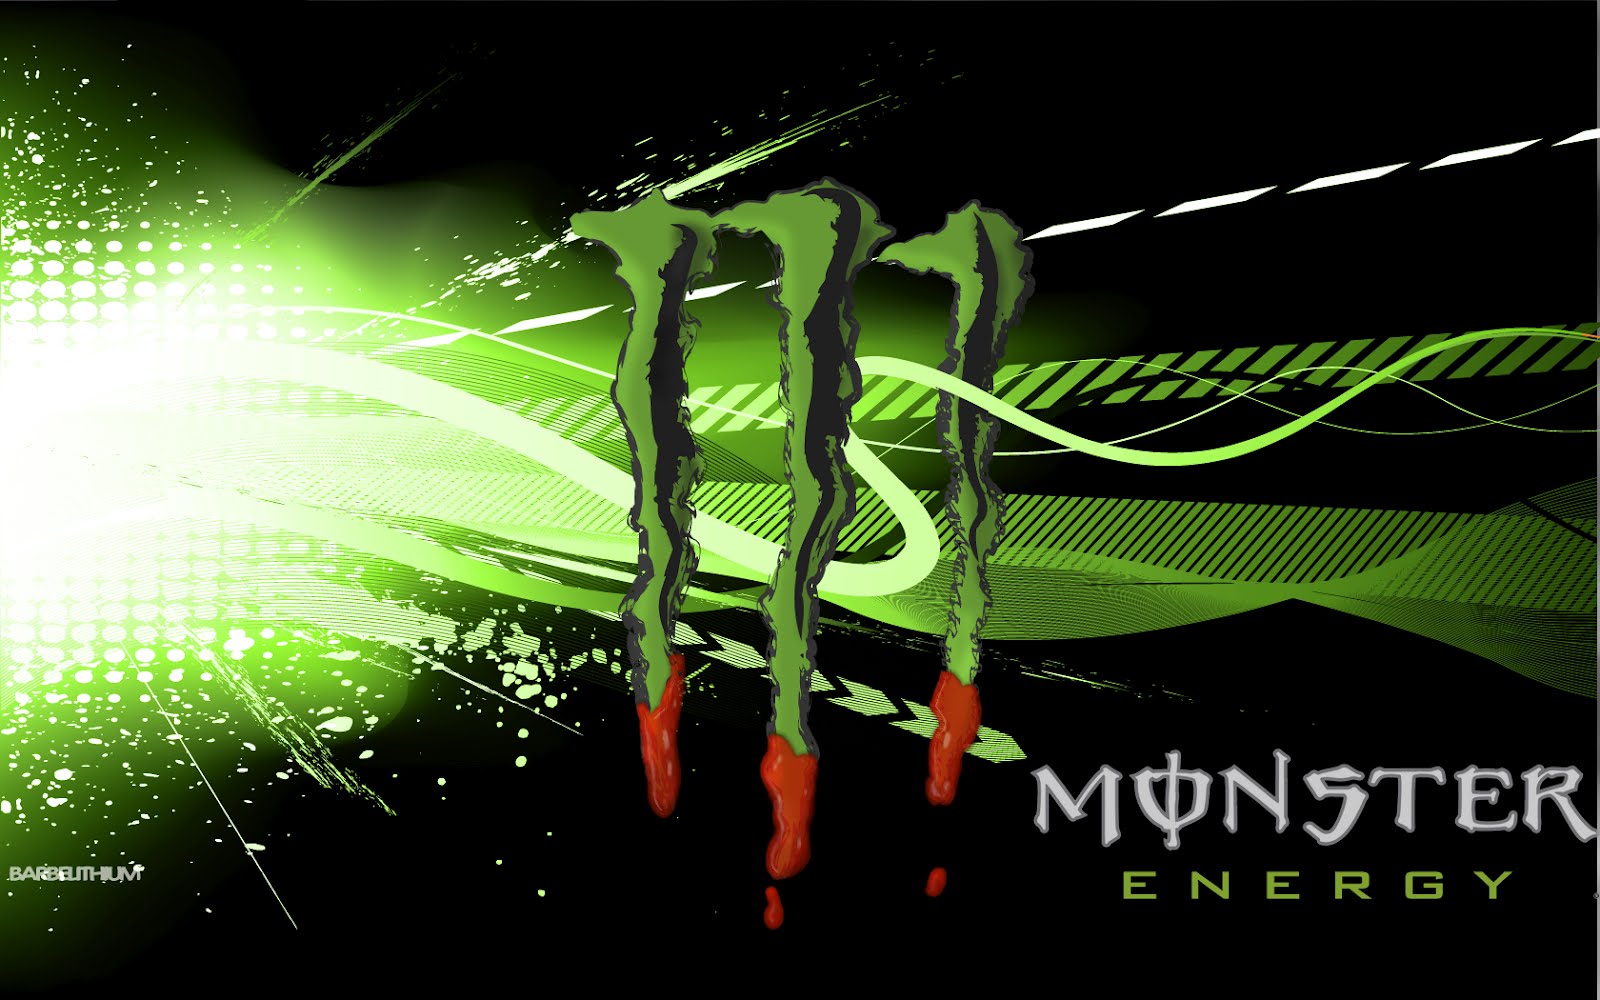 Free Download Monster Energy Wallpapers 3 1600x1000 For Your Desktop Mobile Tablet Explore 49 Energy Wallpaper Energy Wallpaper Rockstar Energy Wallpapers Rockstar Energy Wallpaper